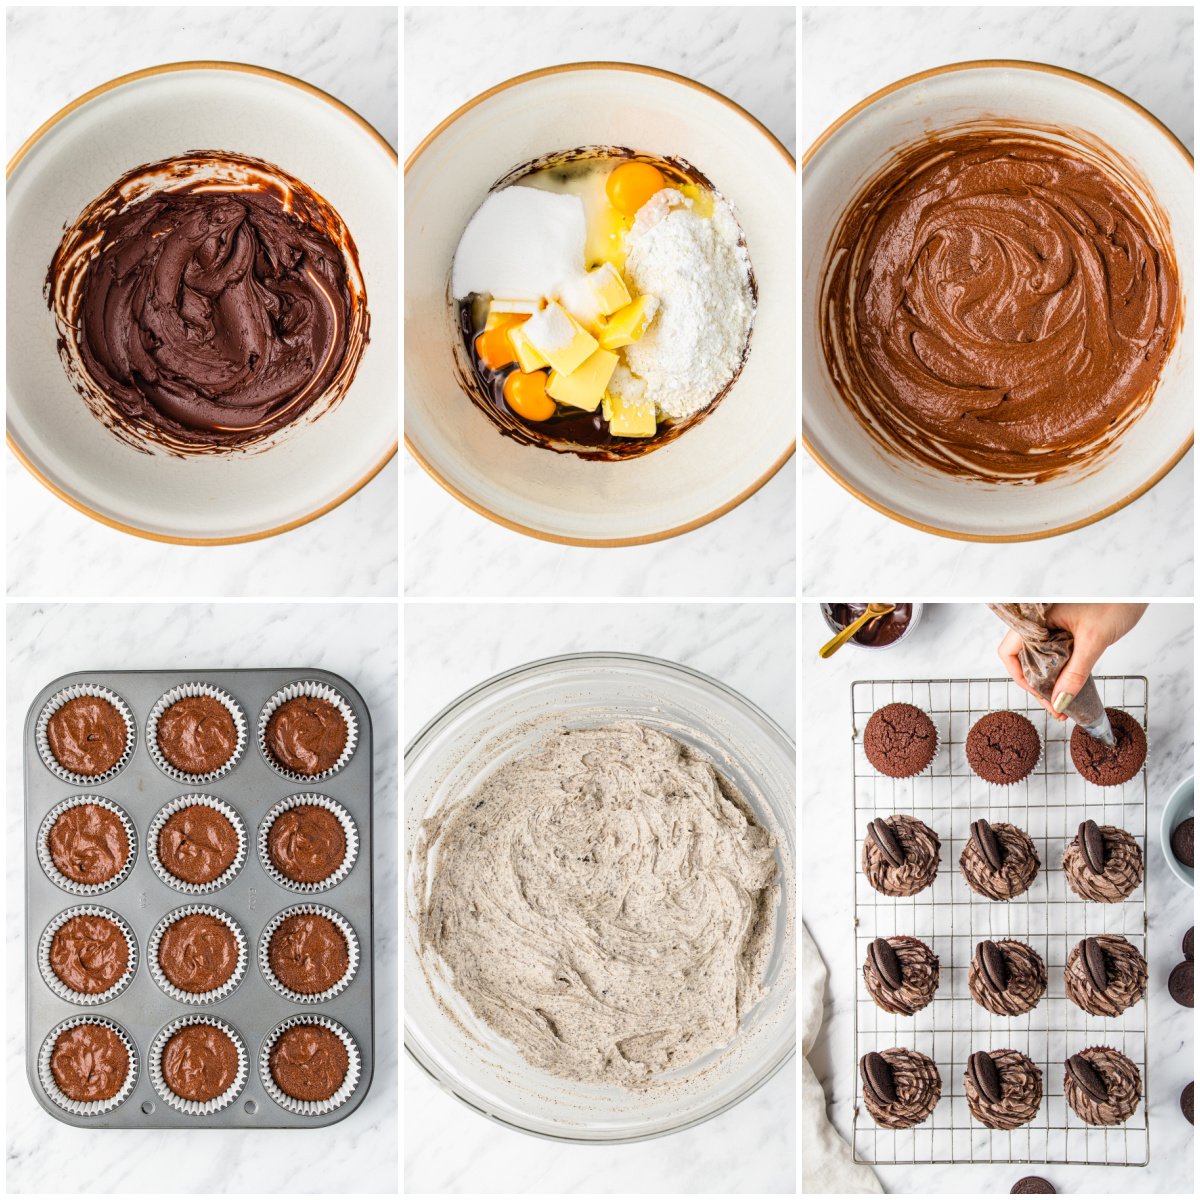 Step by step photos on how to make Oreo Cupcakes.